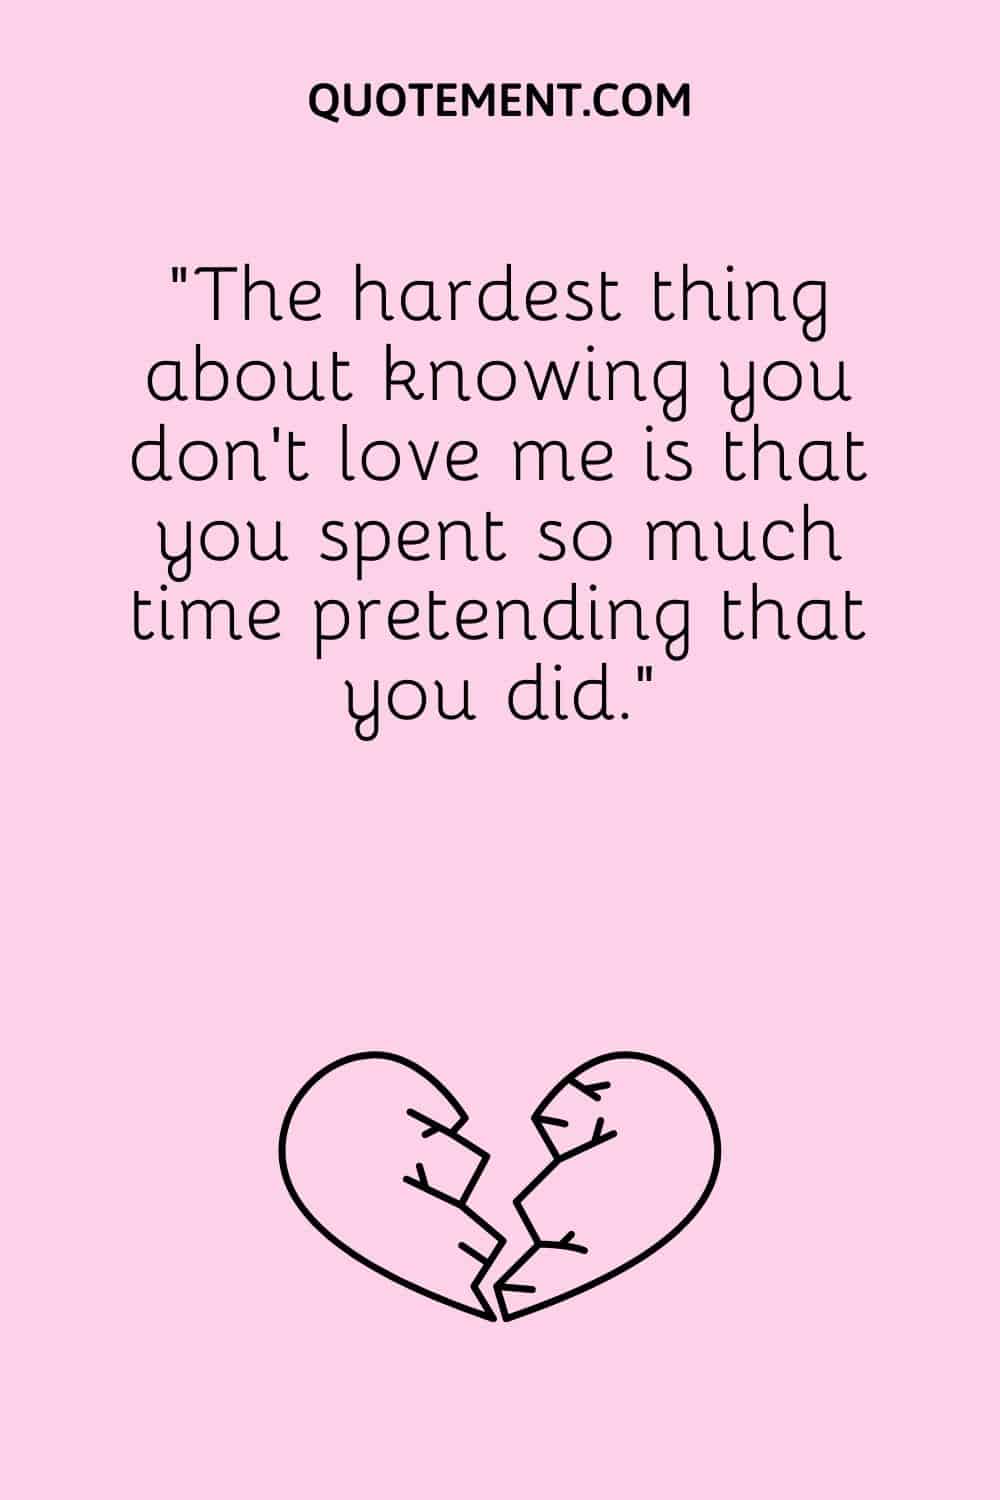 “The hardest thing about knowing you don’t love me is that you spent so much time pretending that you did.”